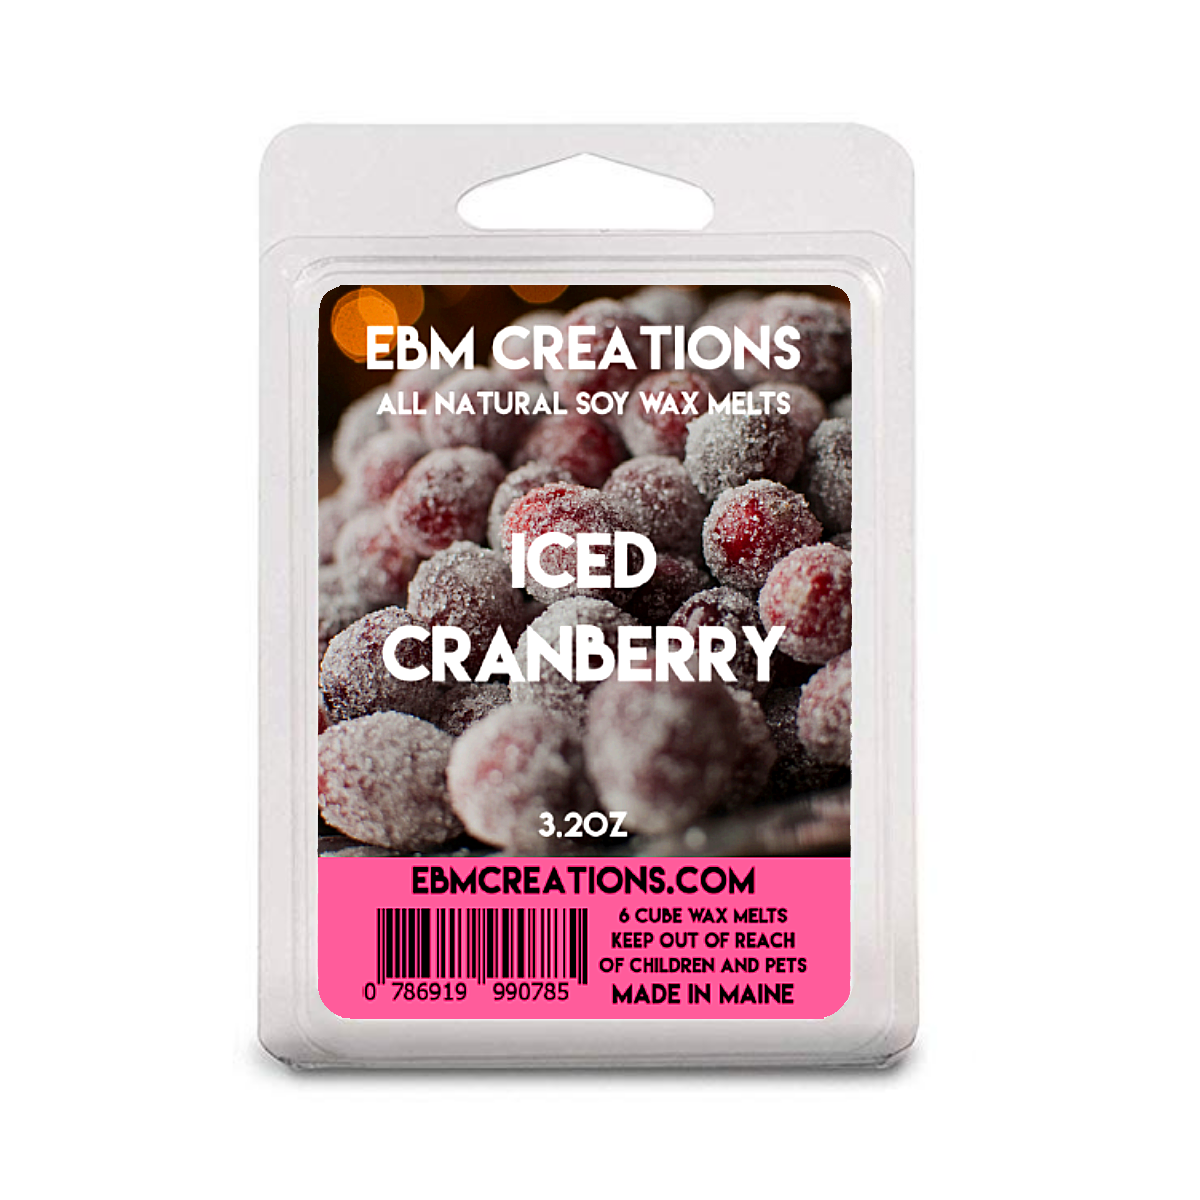 Iced Cranberry - 3.2 oz Clamshell